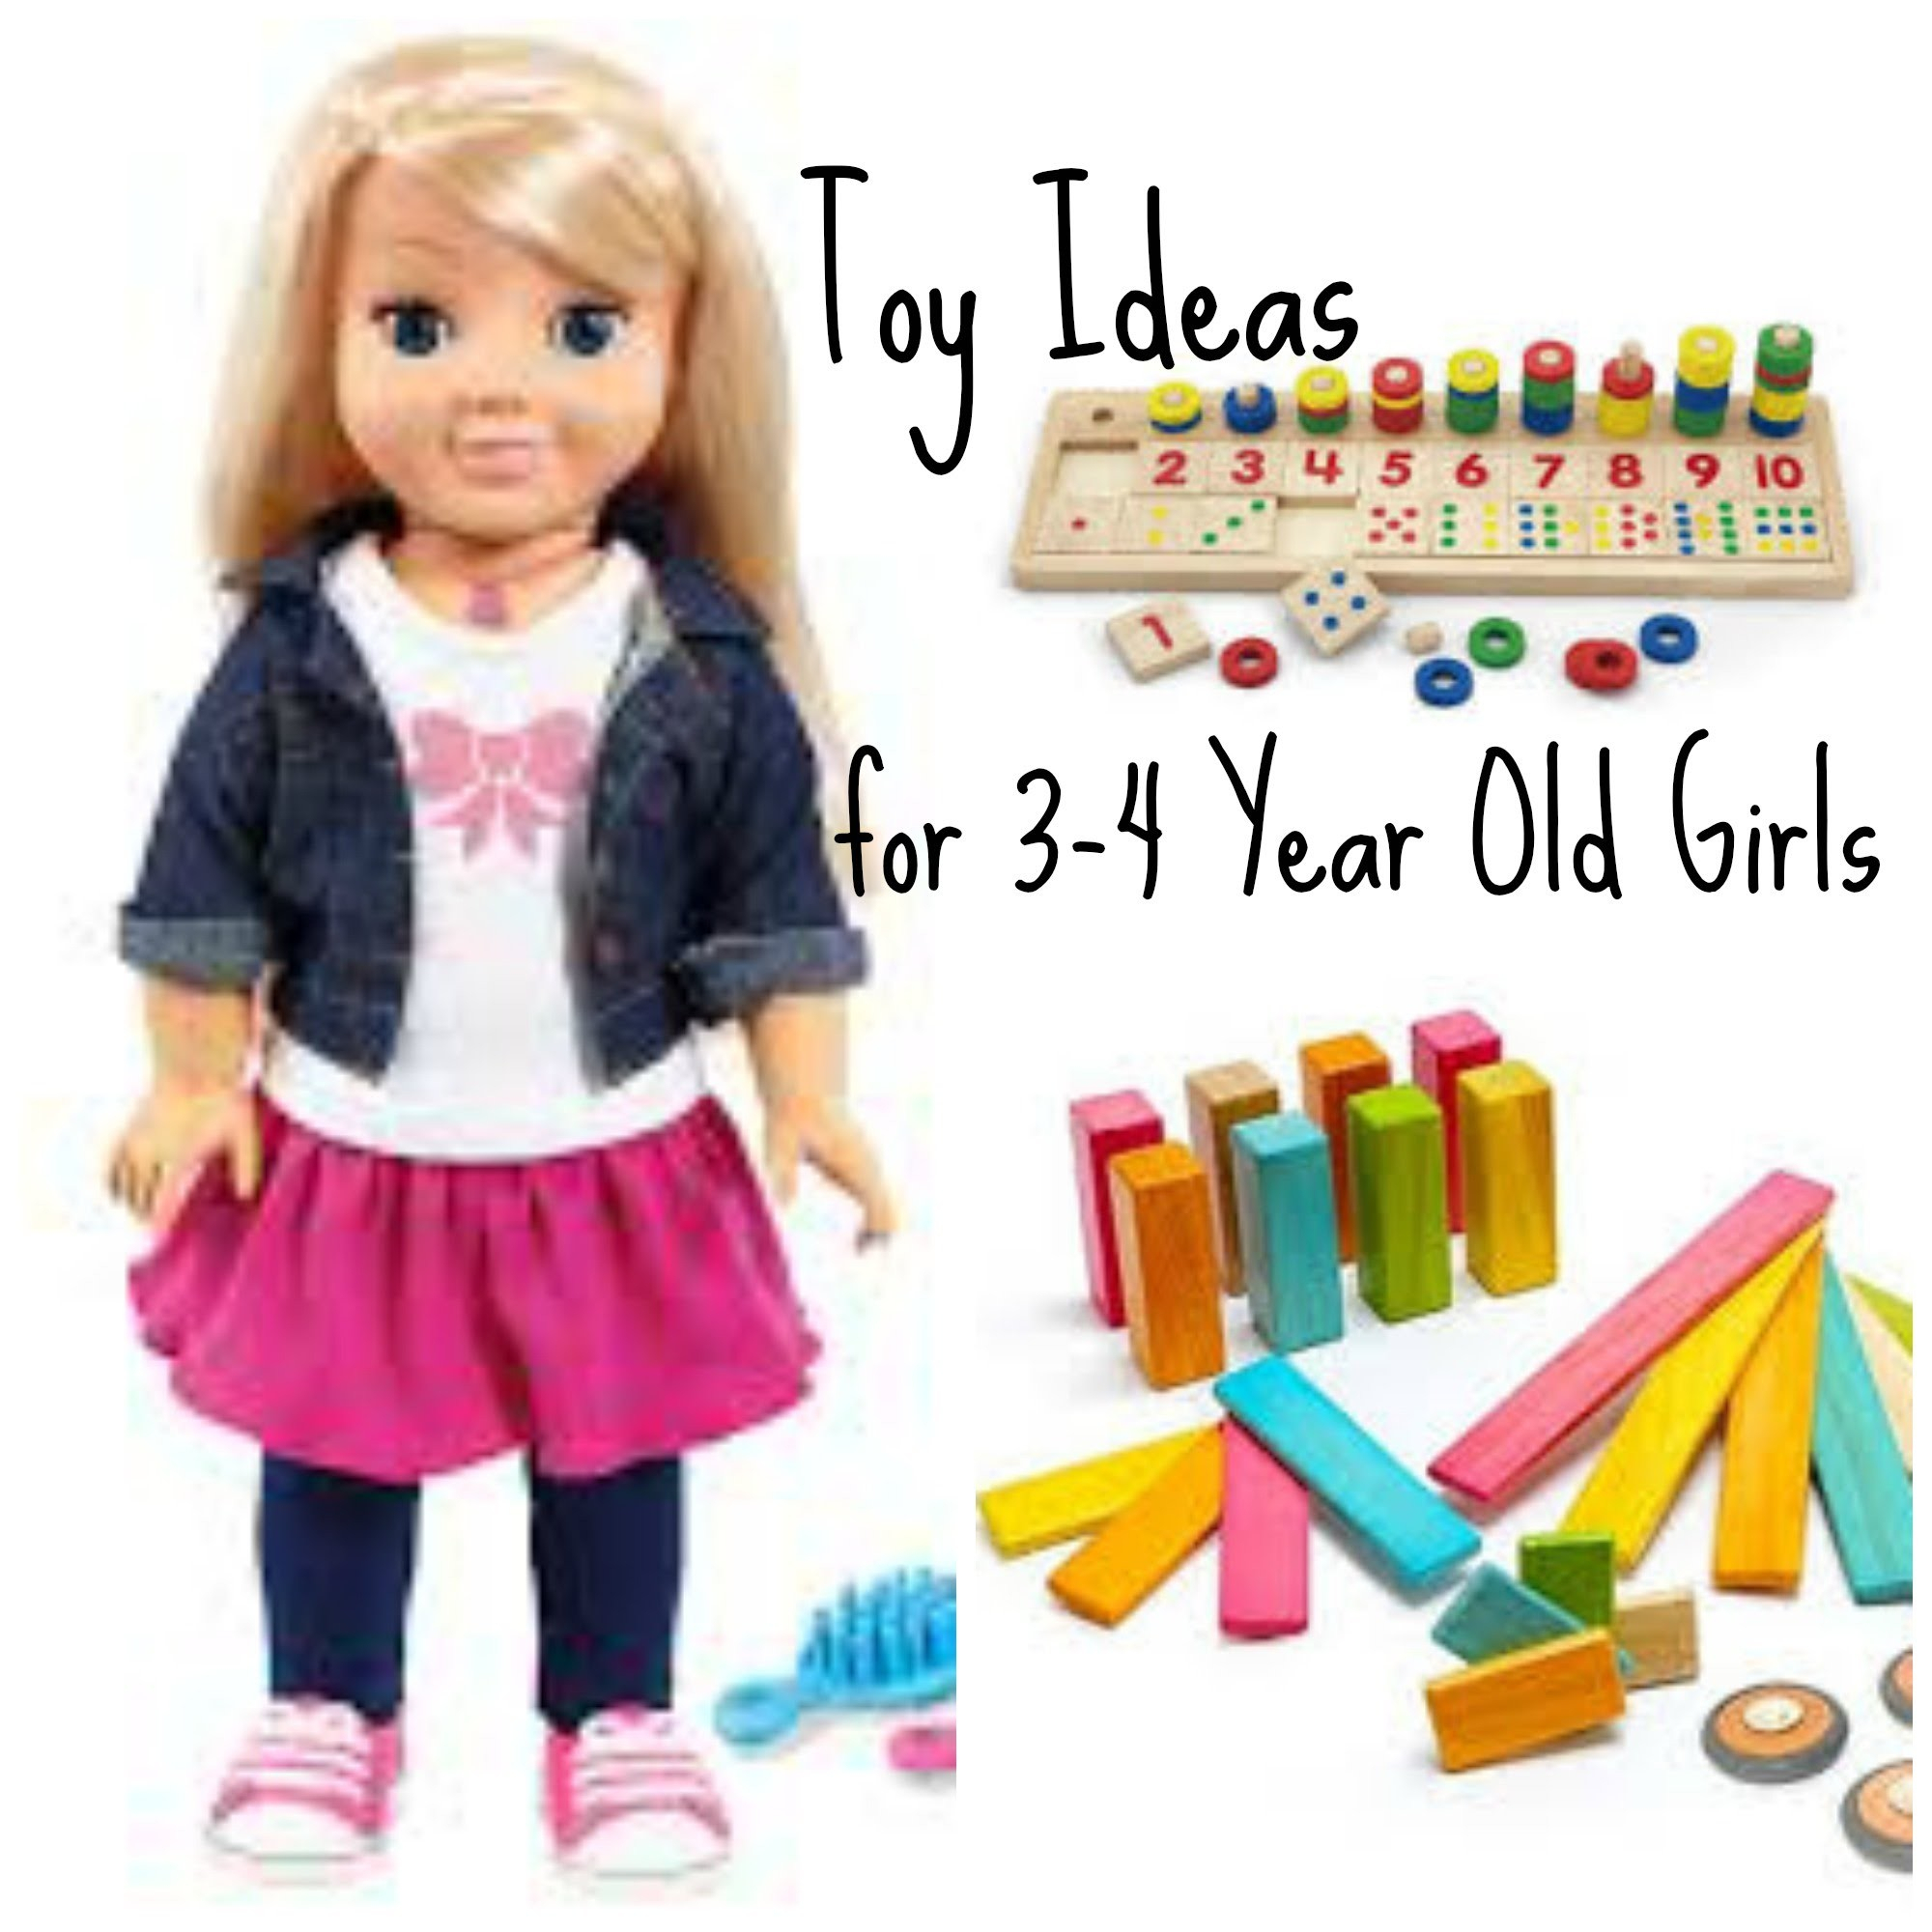 10 Most Recommended Gift Idea For 3 Year Old Girl maxresdefault toys for 3 year old girl 1 indianmemories 2022